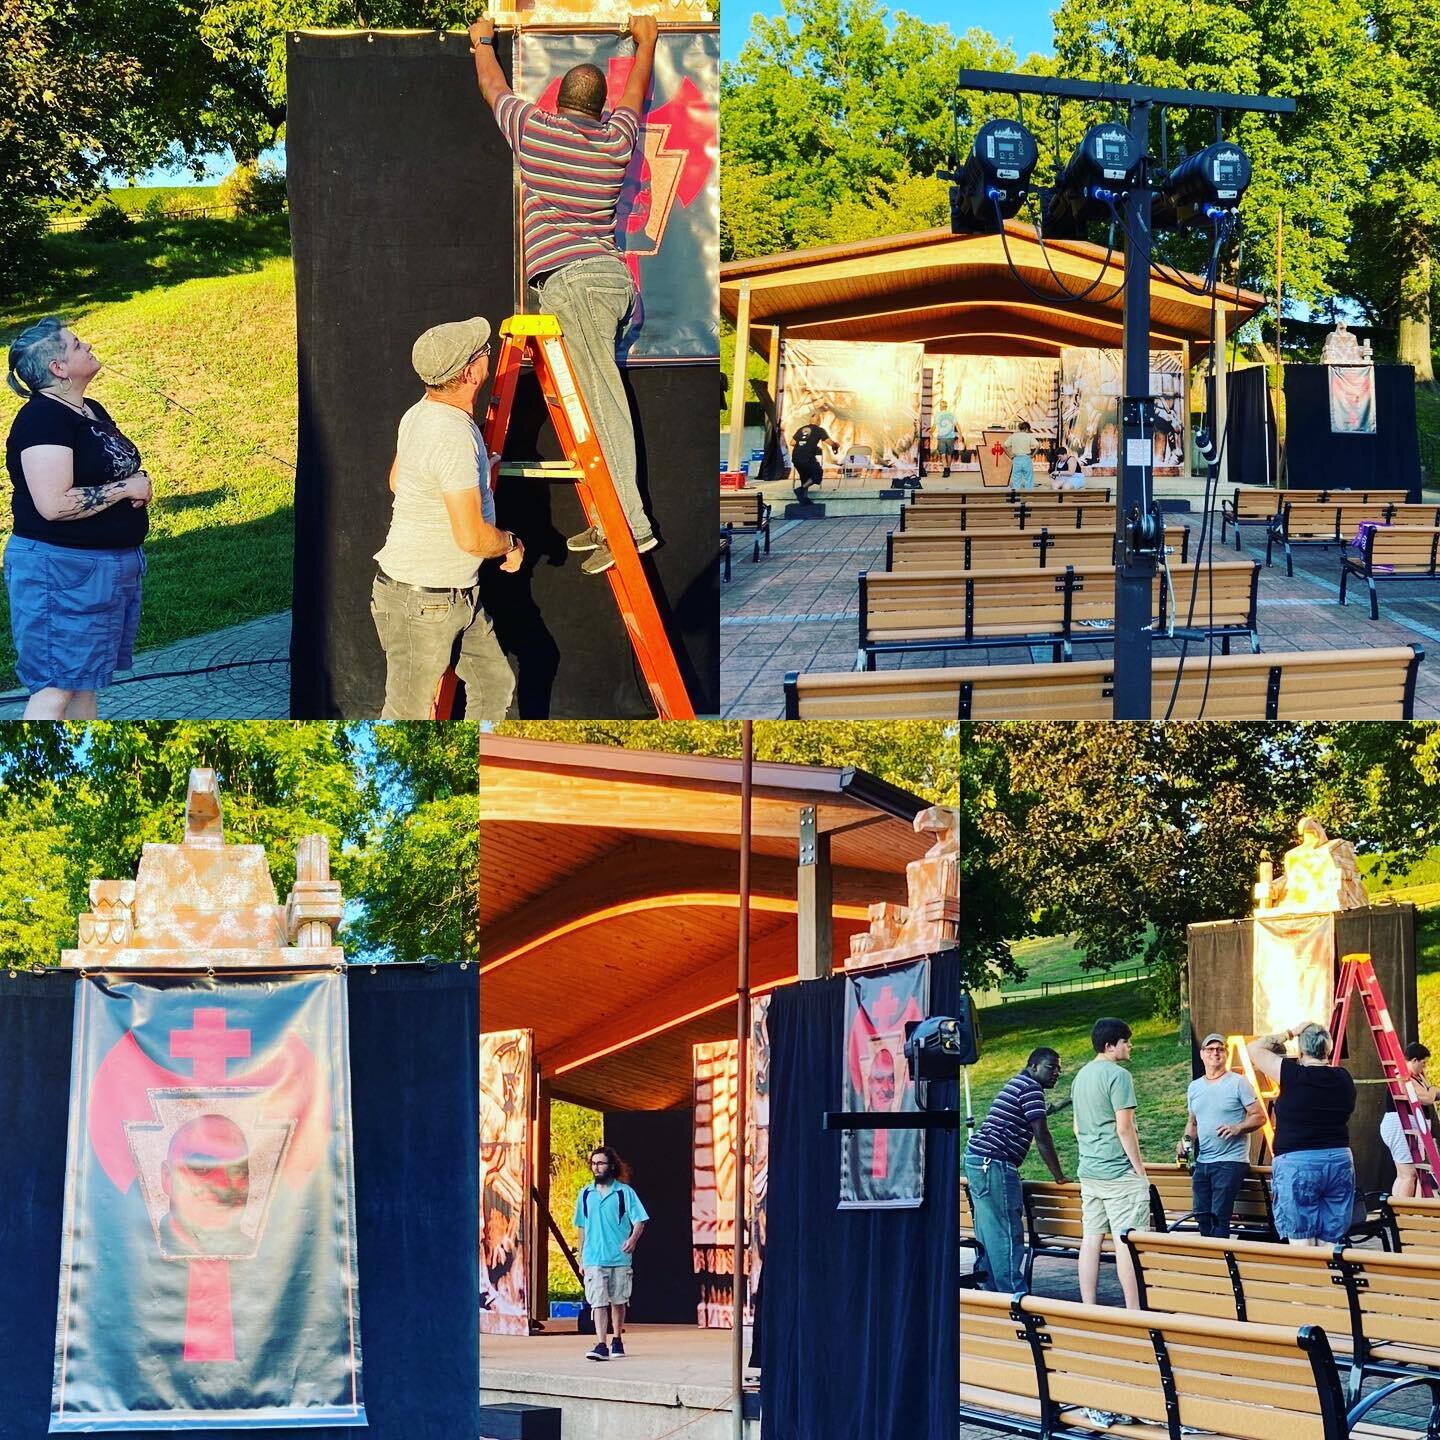 So proud of our friends involved with @narcissetheatrecompany &amp; their 2nd annual Free Italian Lake production. This year&rsquo;s imaginative outdoor drama is Sophocles&rsquo; ANTIGONE. 717 Arts has helped bring volunteers into the mix fir these s